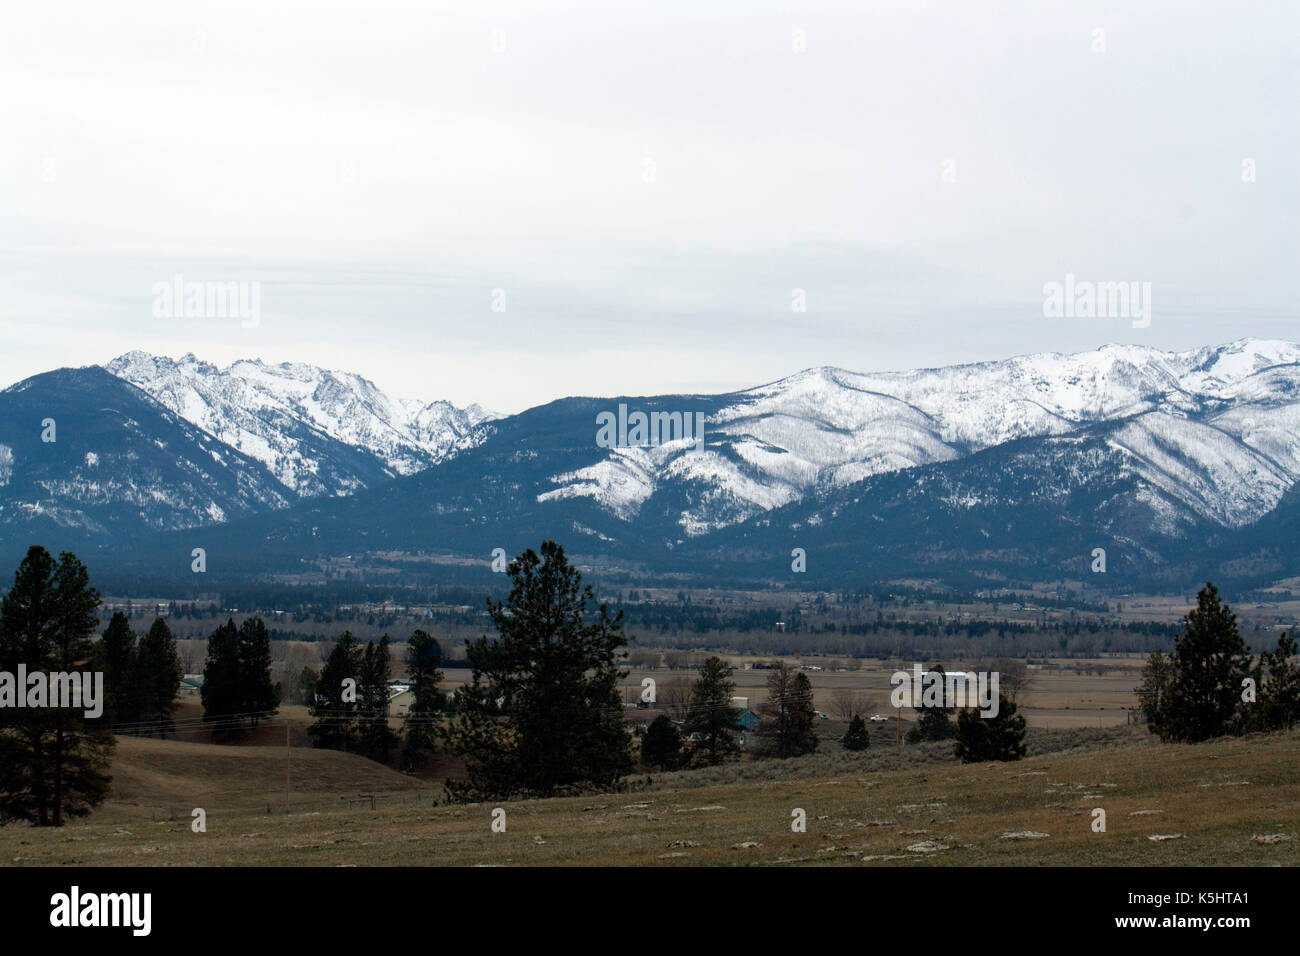 Snow capped mountains in the middle of winter. Section of the Rocky Mountains located in Bitterroot Valley, Montana. North America, USA. Stock Photo